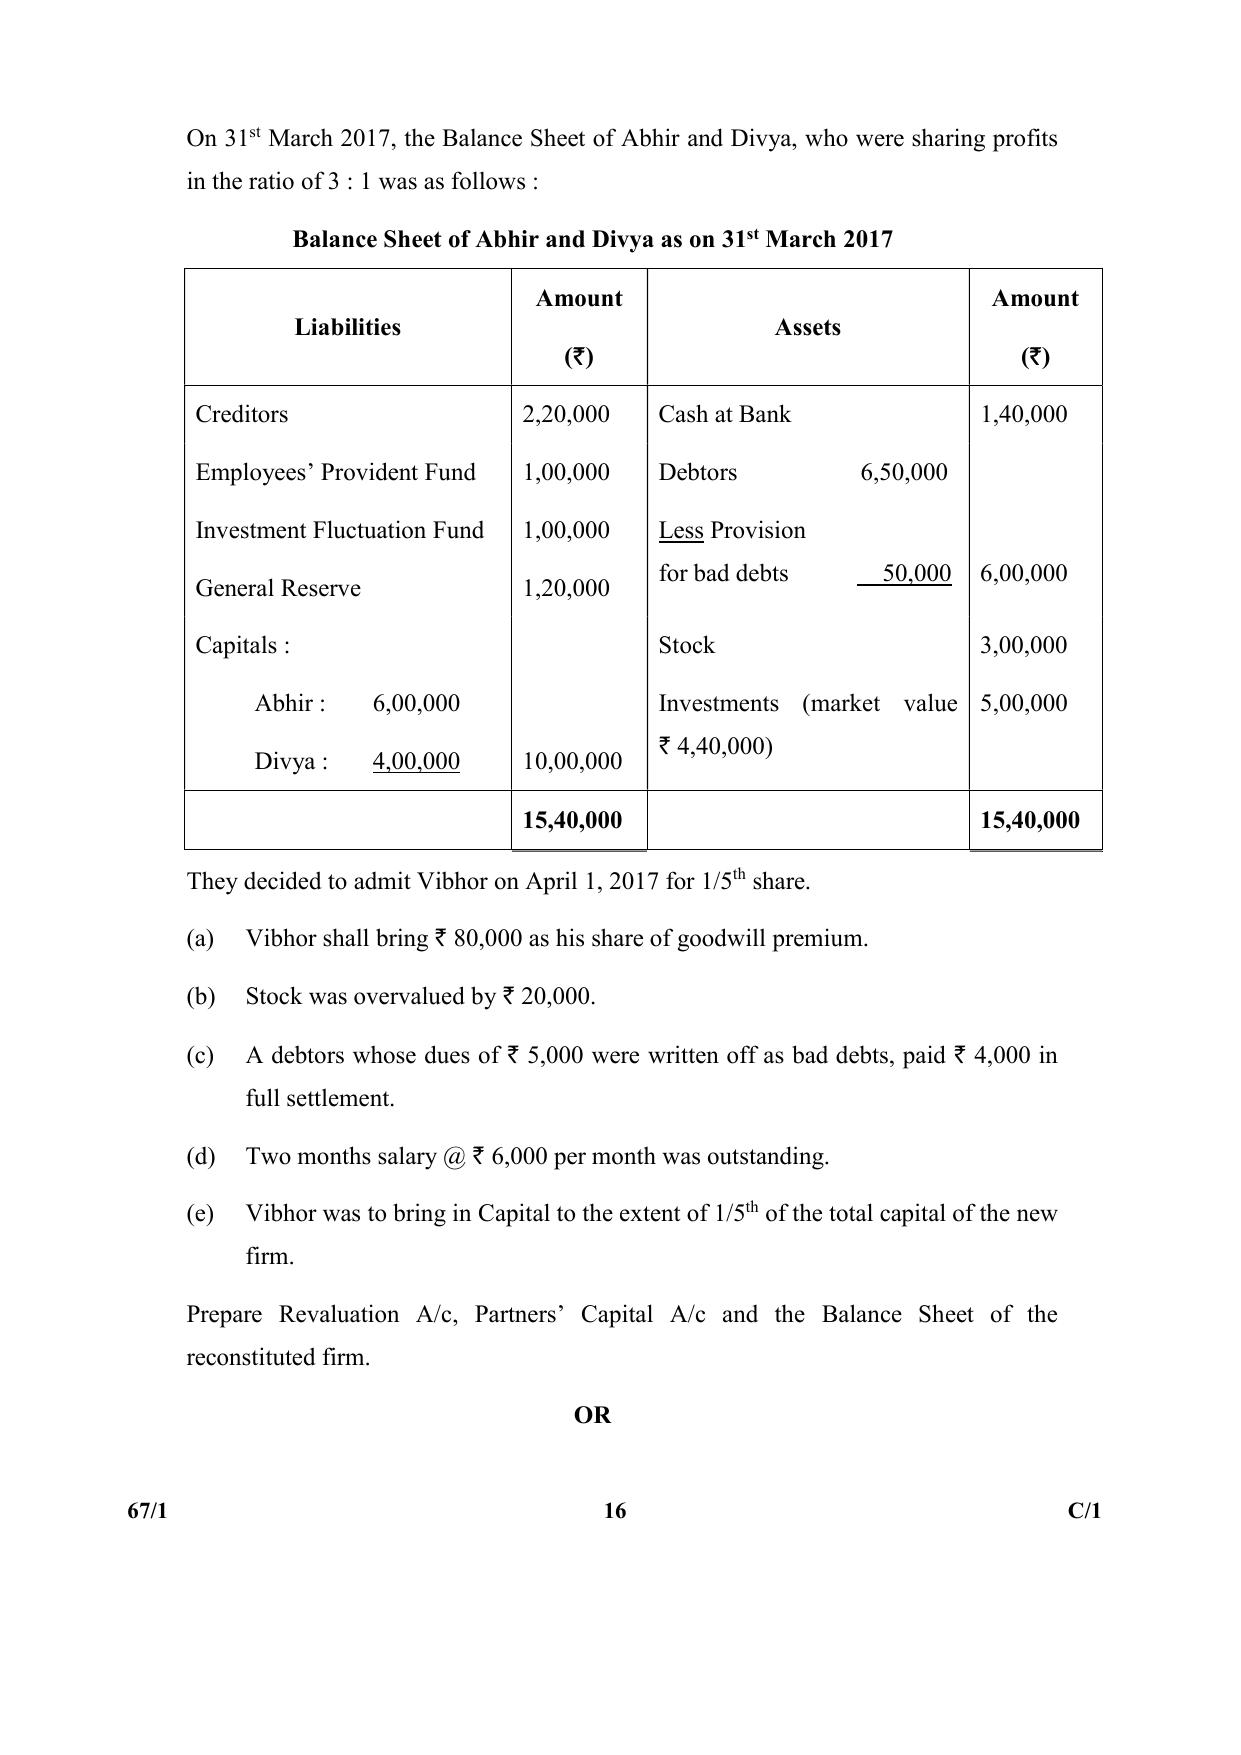 CBSE Class 12 67-1  (Accountancy) 2018 Compartment Question Paper - Page 16